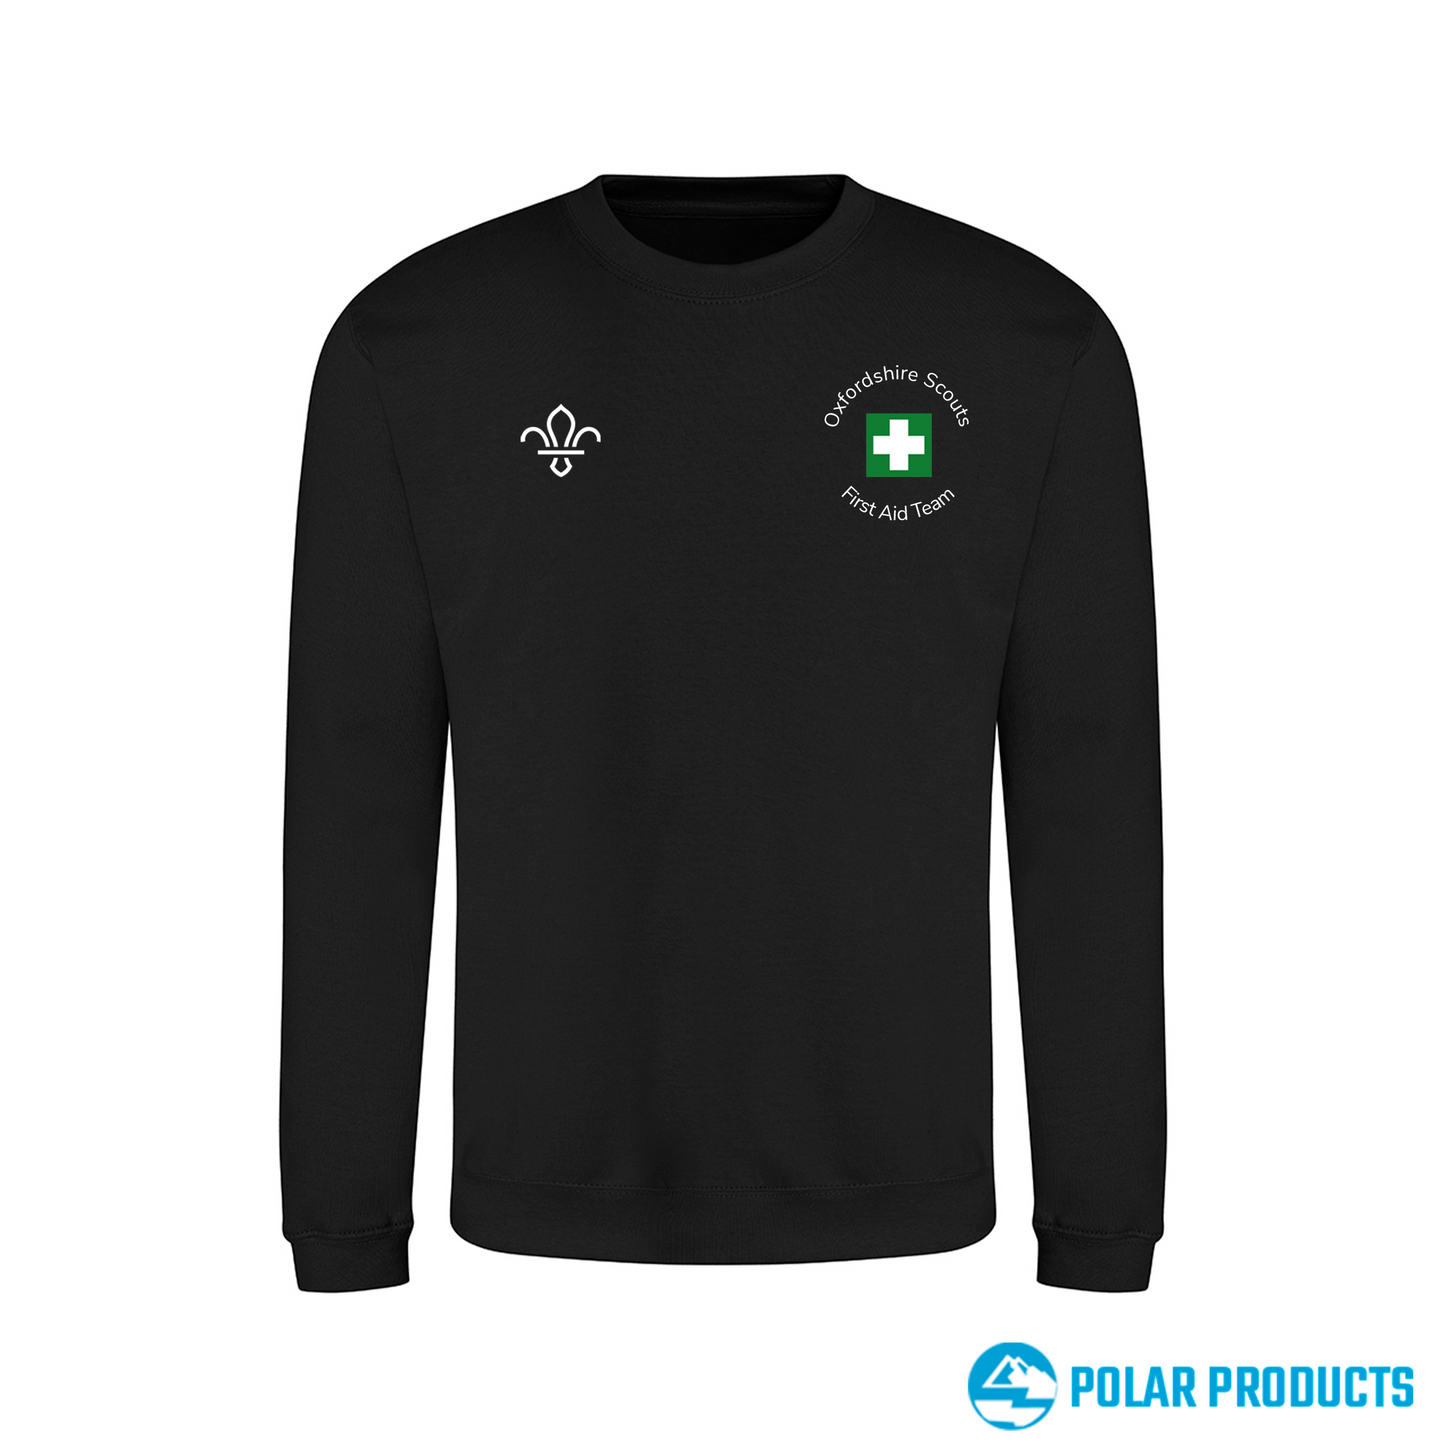 Oxfordshire Scouts First Aid Team Sweatshirt